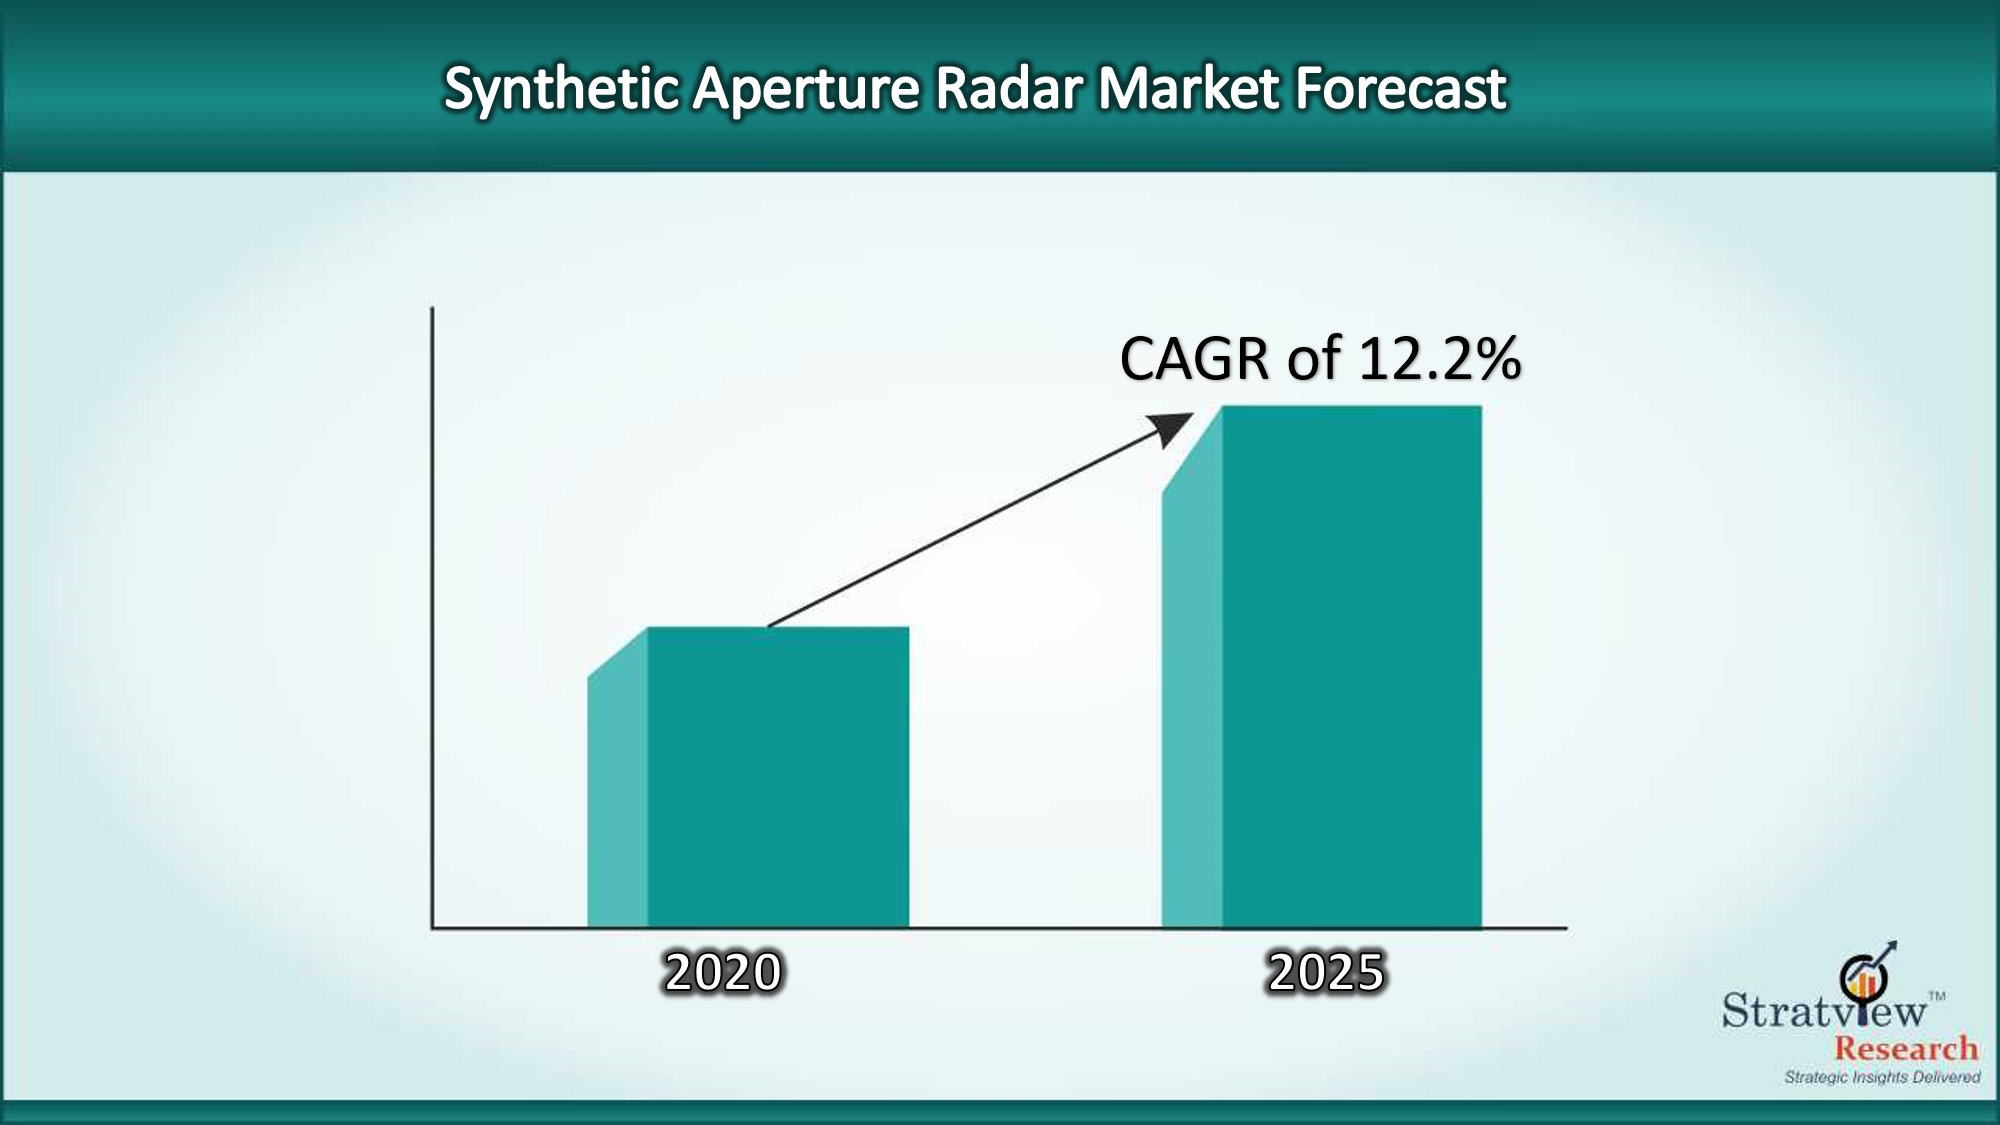 Synthetic Aperture Radar Market to experience an impressive growth of 12.2% during 2020-2025